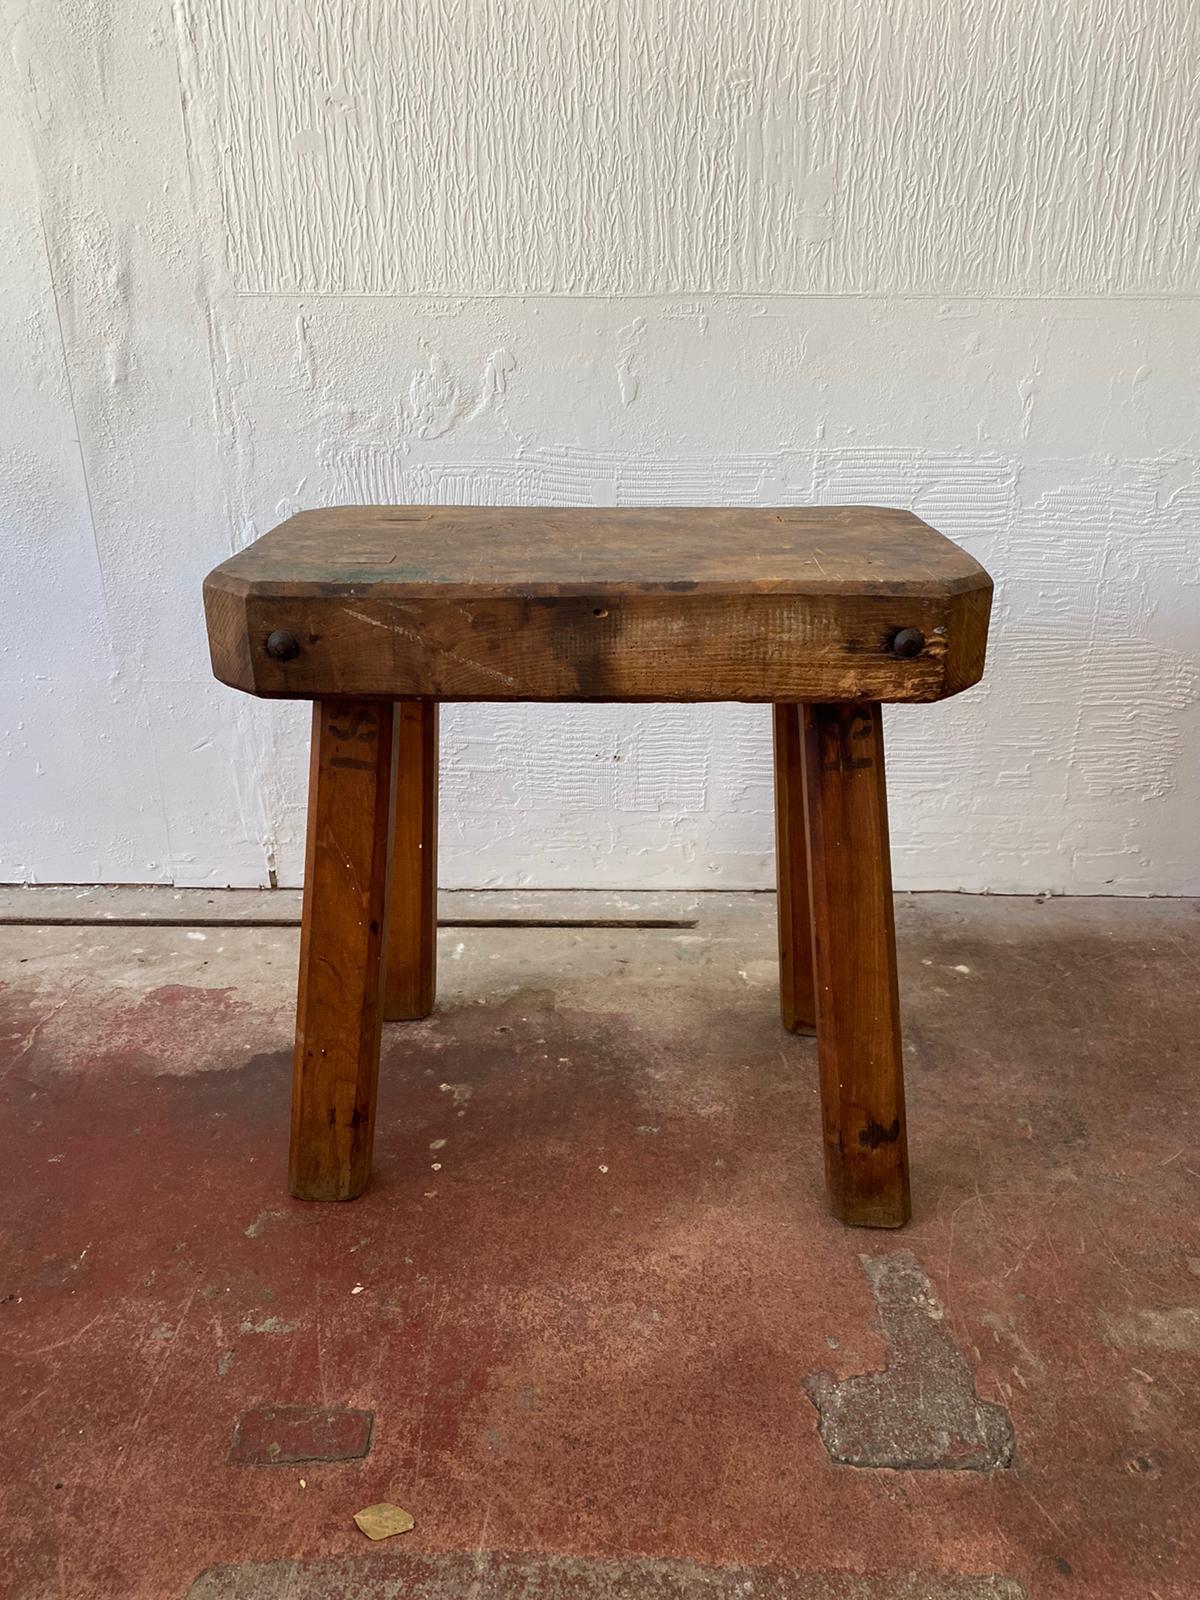 A great 20th century heavy topped block table, it looks like it has come from an industrial setting. Nautical Rope maker? Net fixer? I bought it by the coast! It would be great in living area/kitchen/boot room/laundry/ hallway.

It has a makers name